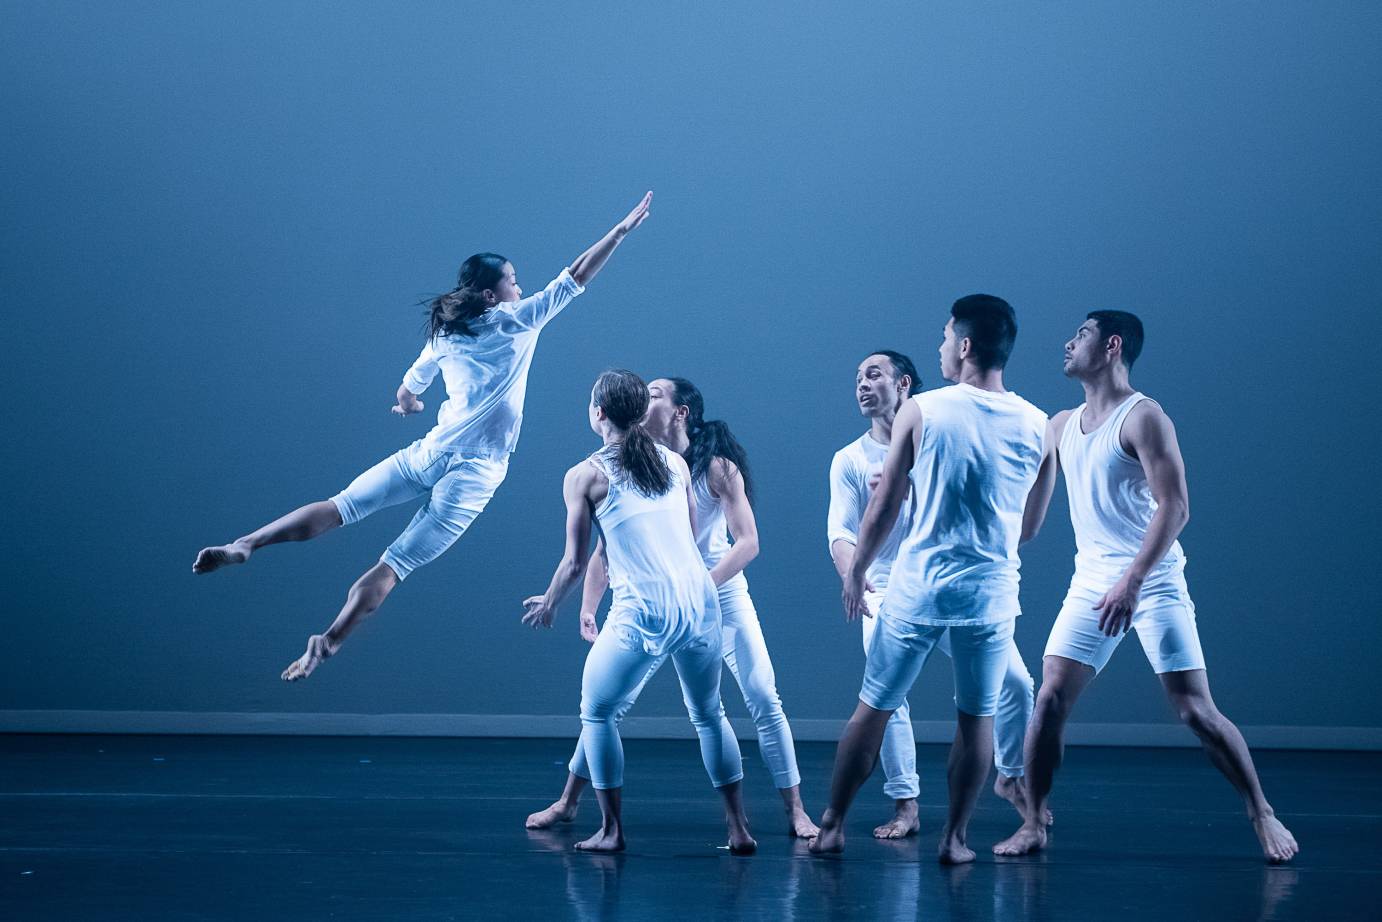 One woman dives into a group of dancers; everyone is in white